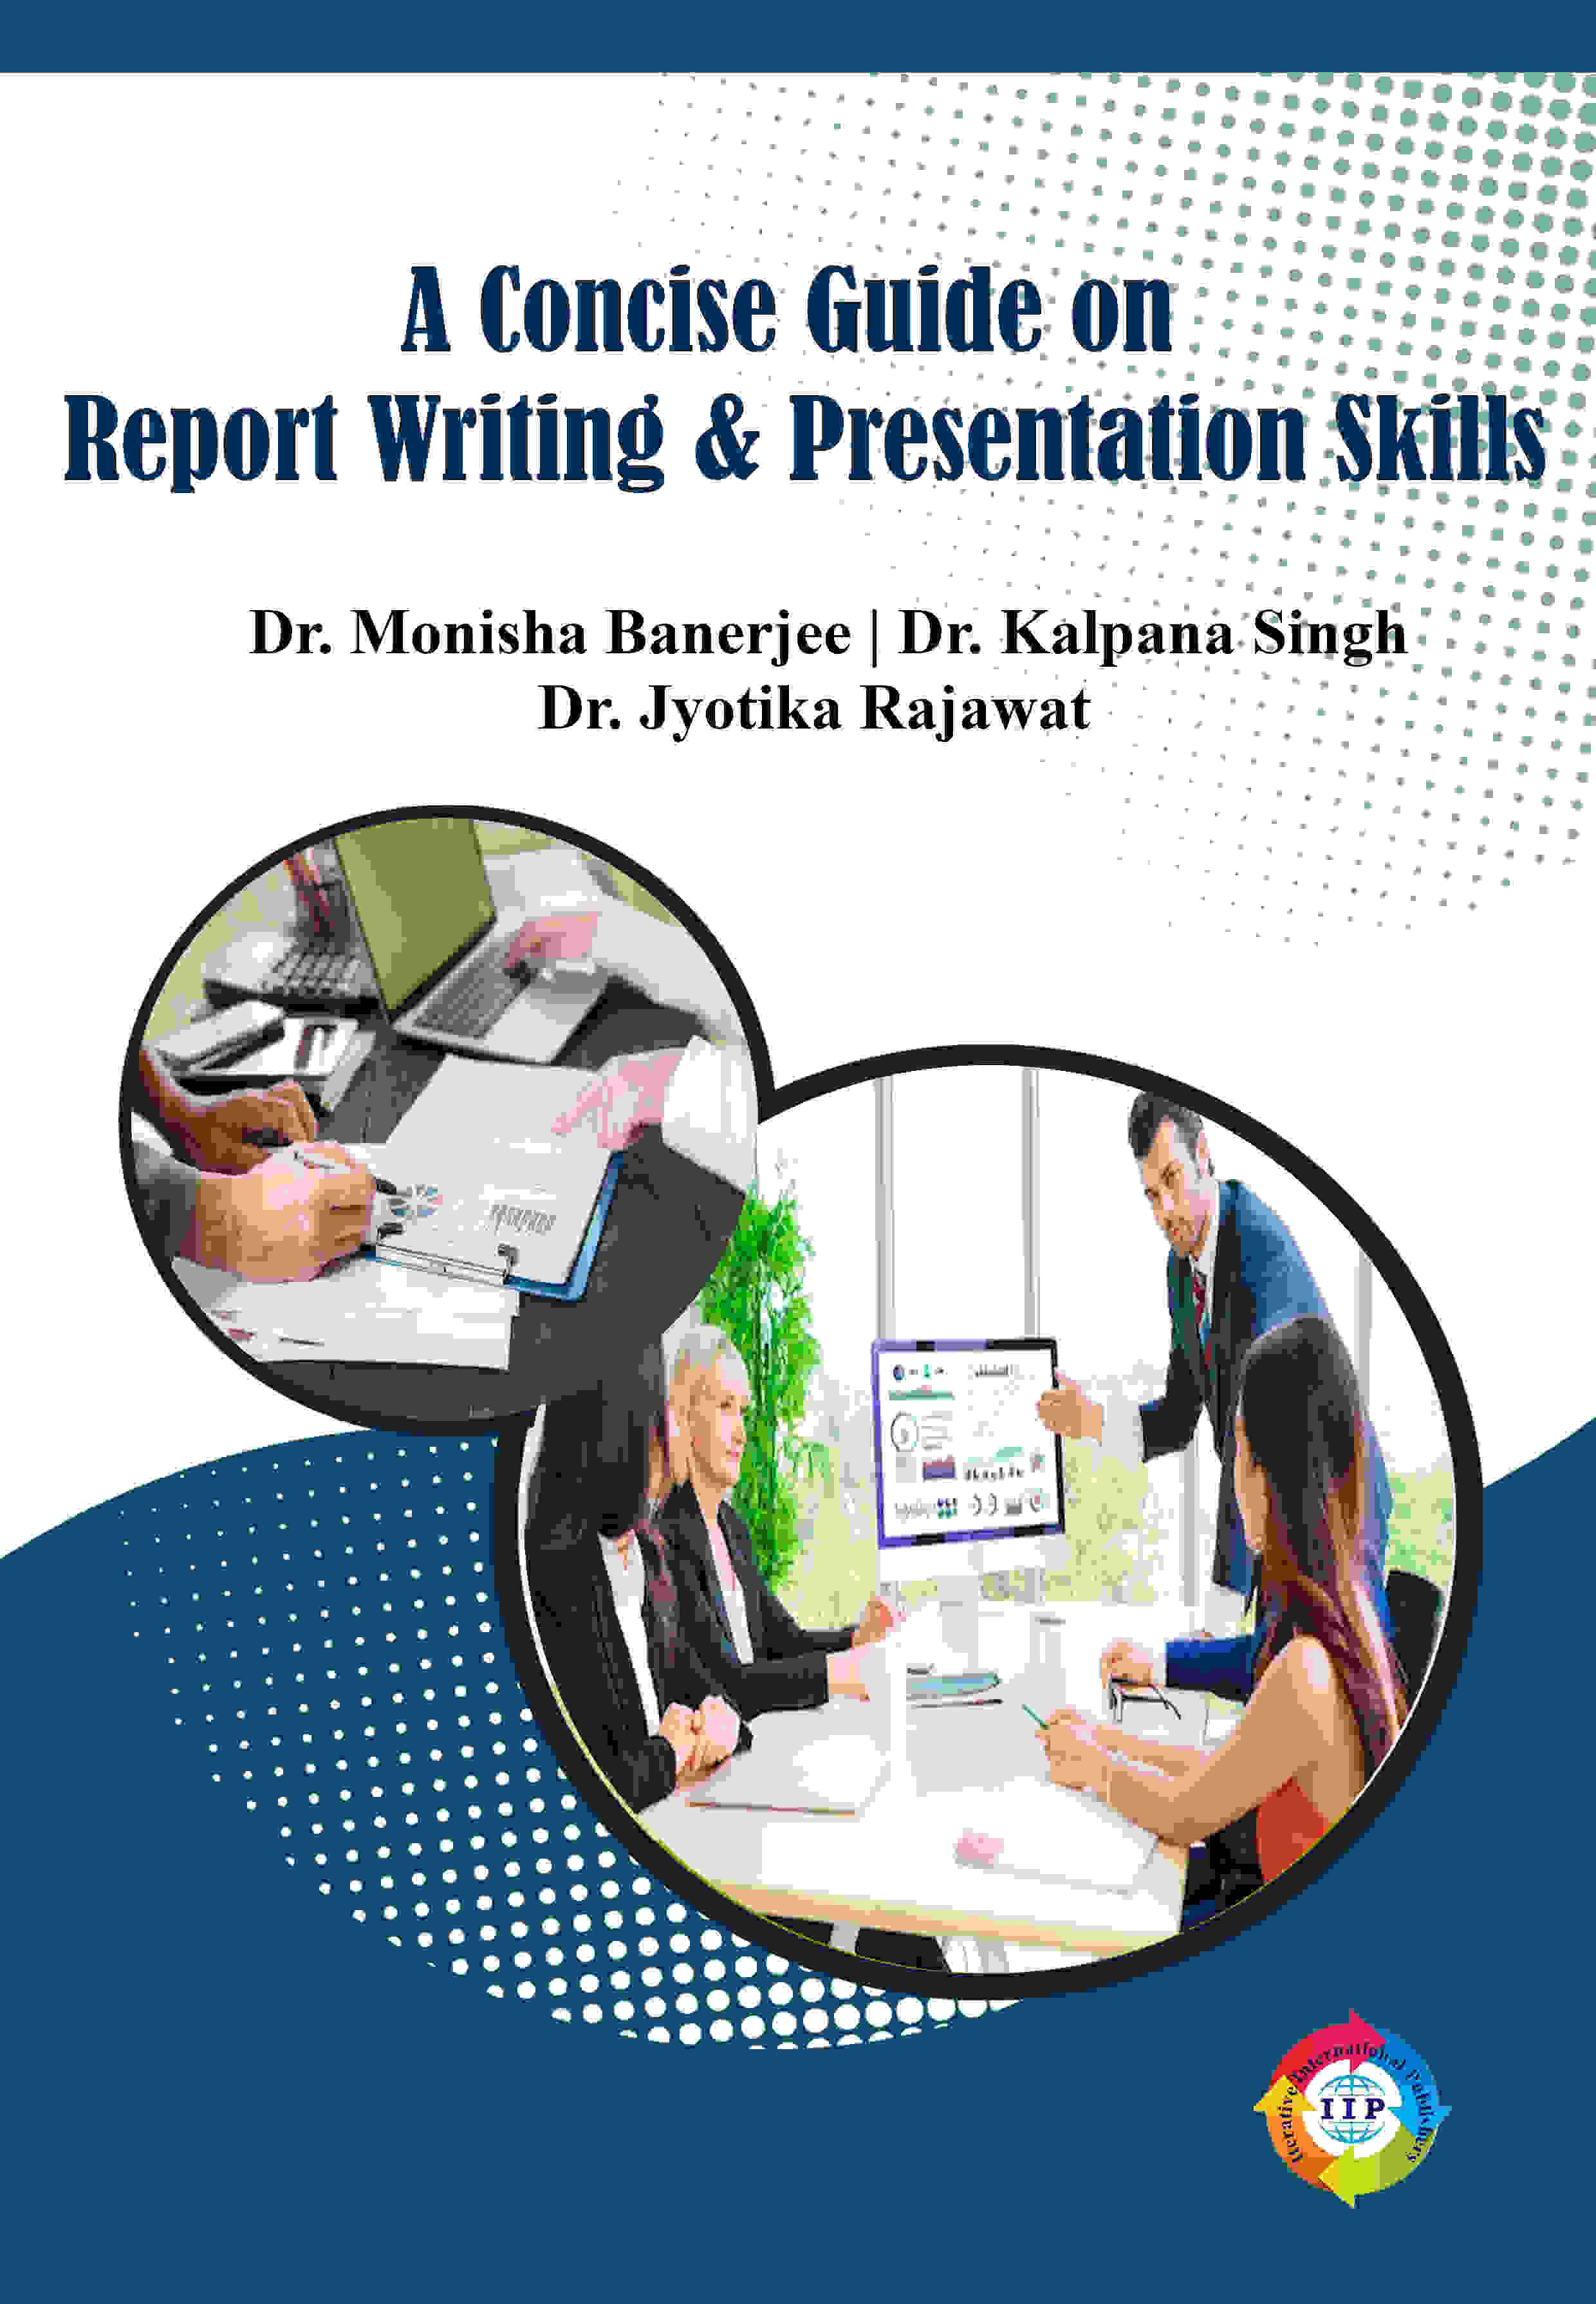 A CONCISE GUIDE ON REPORT WRITING AND PRESENTATION SKILLS